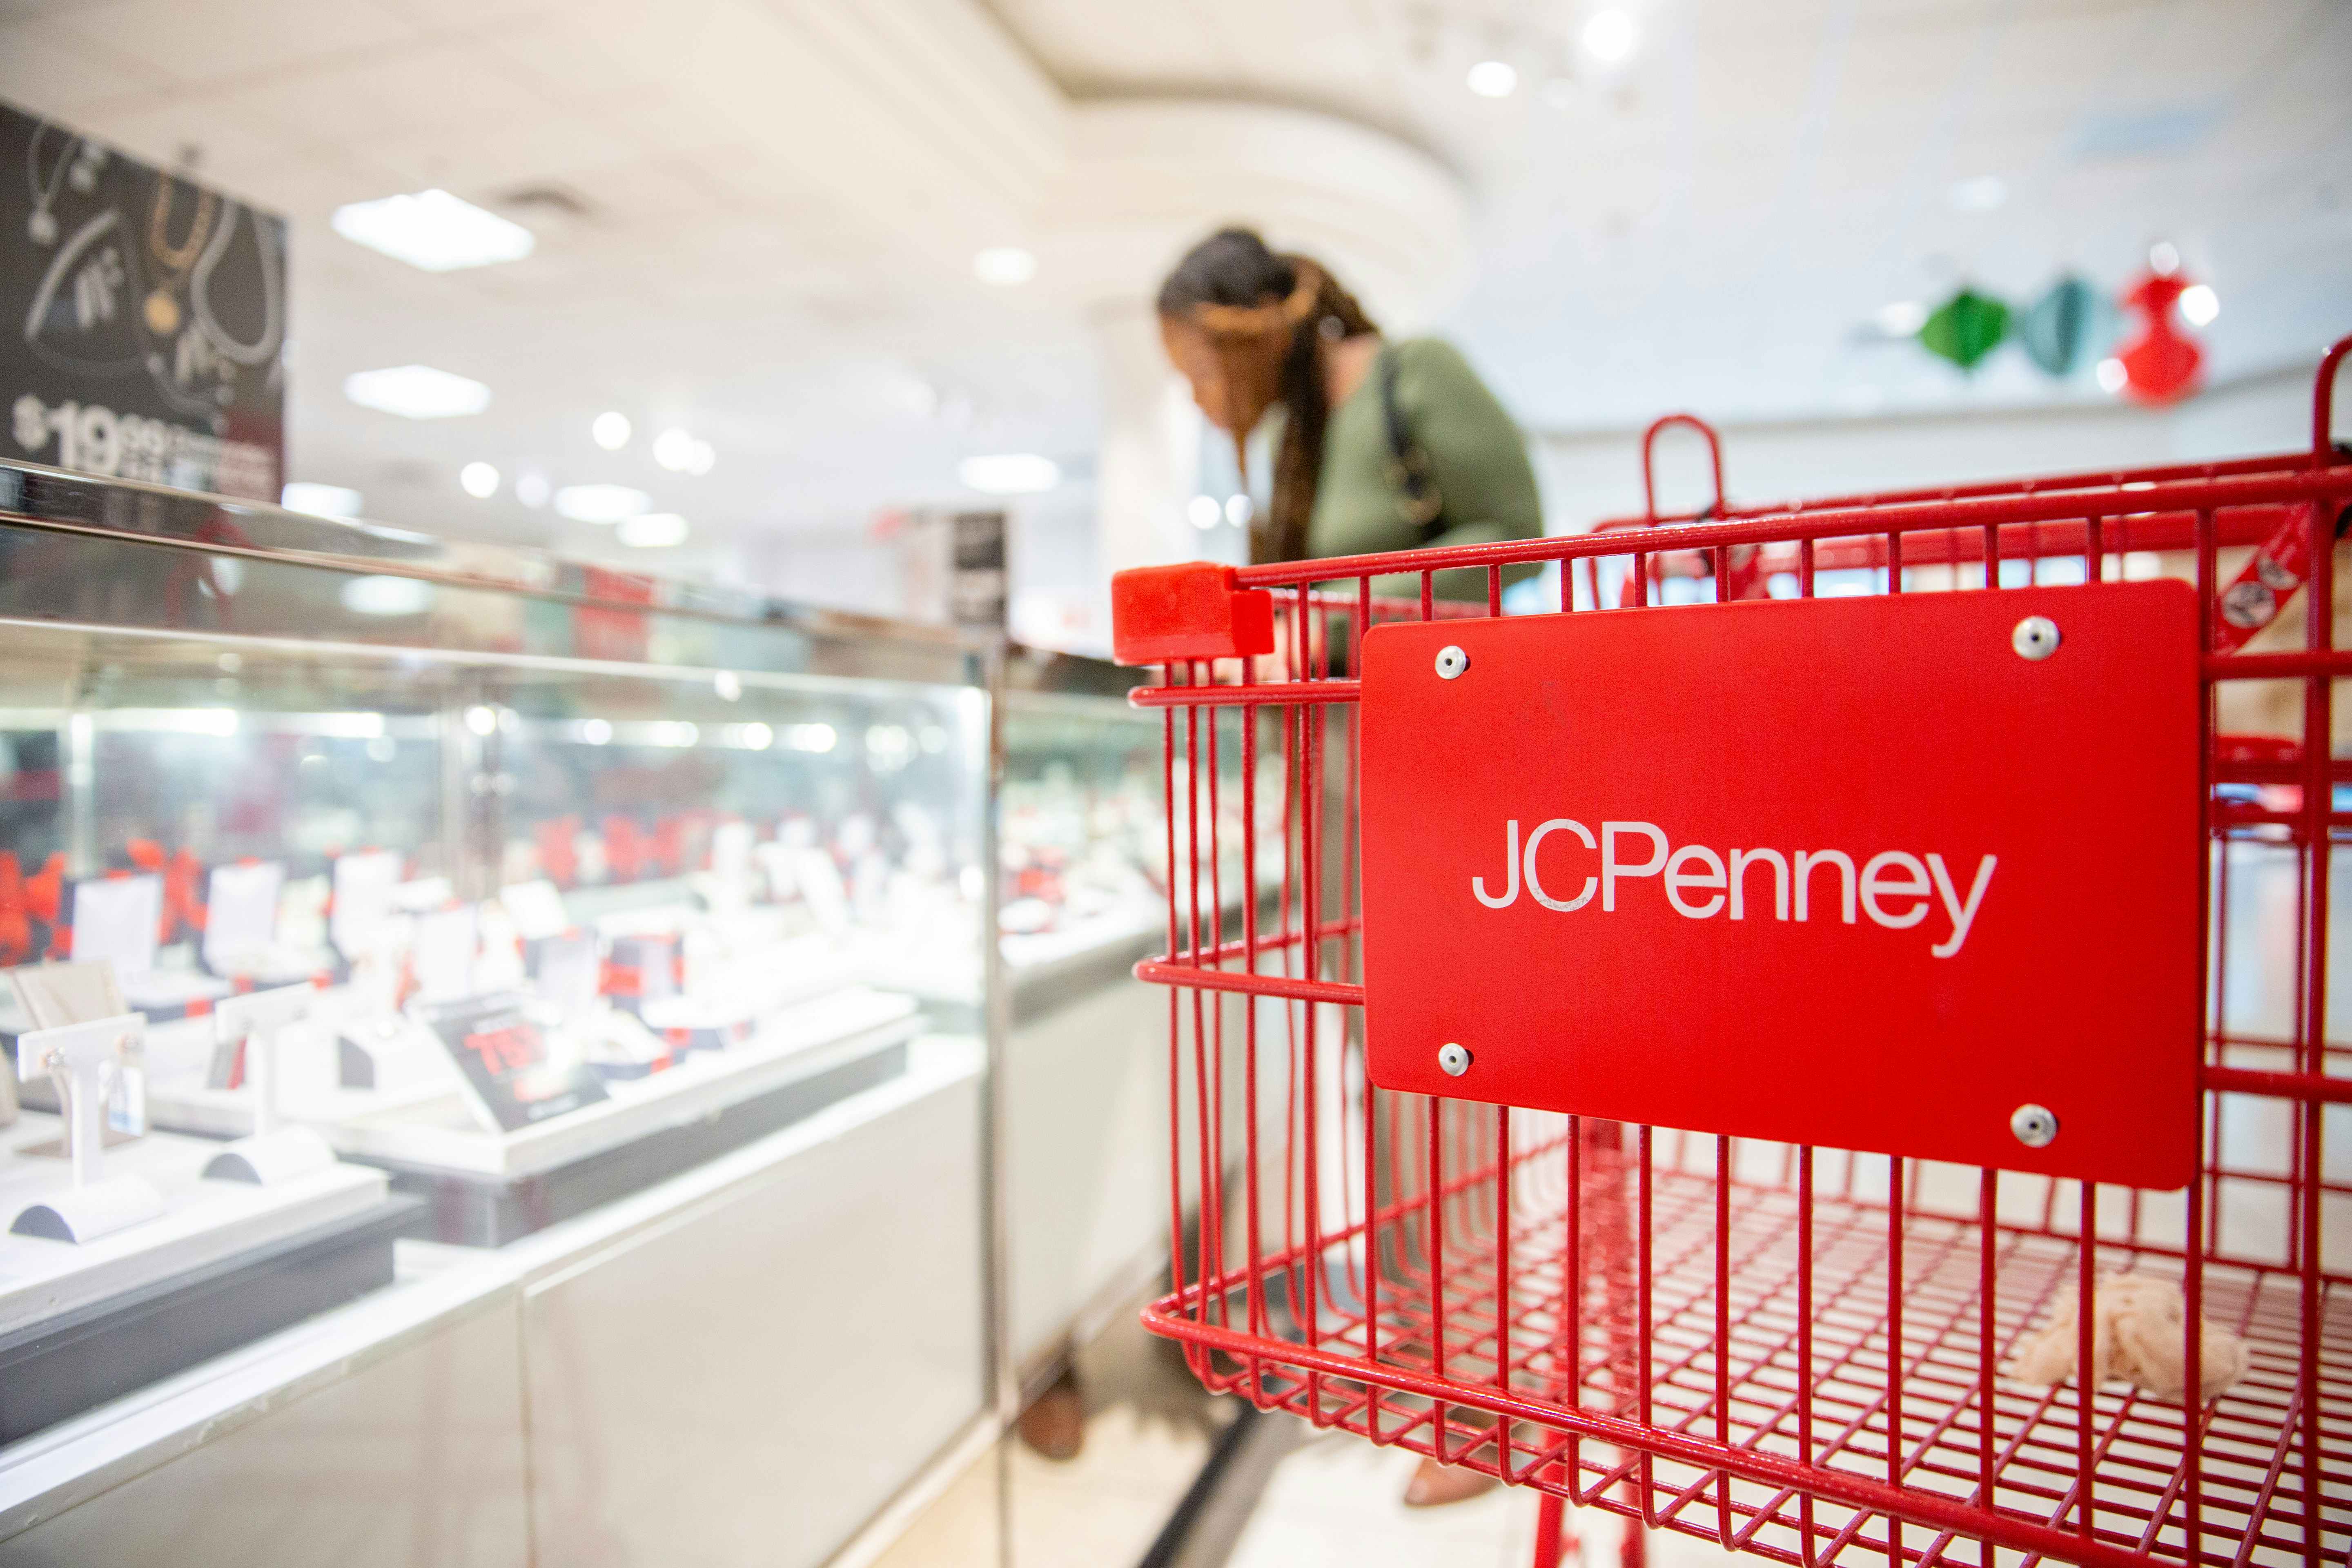 a woman shopping in jcpenney with a cart in the foreground